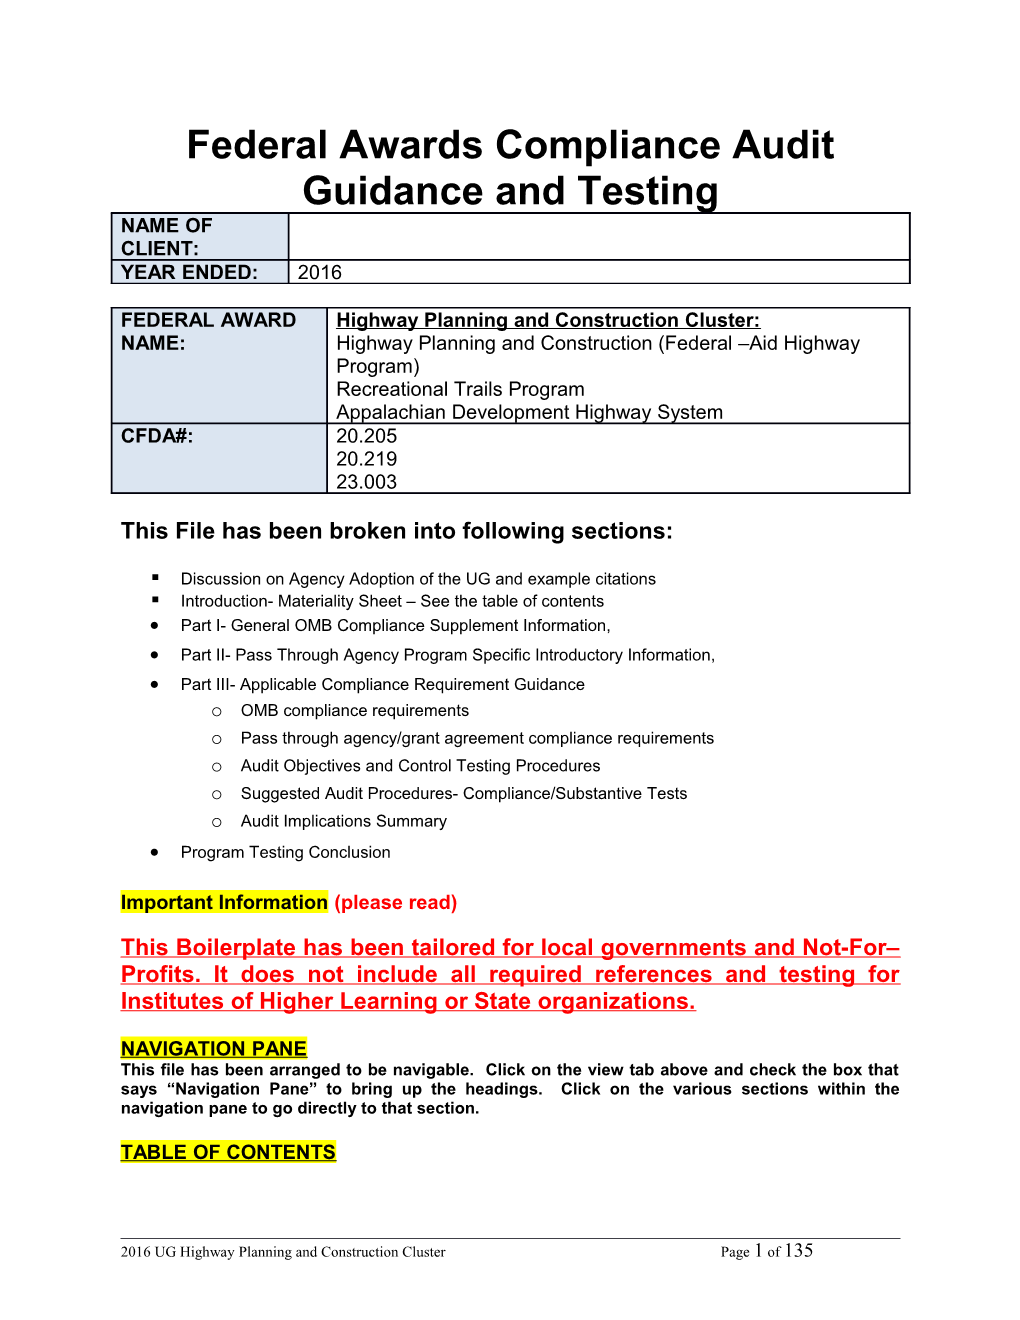 Federal Awards Compliance Audit Guidance and Testing